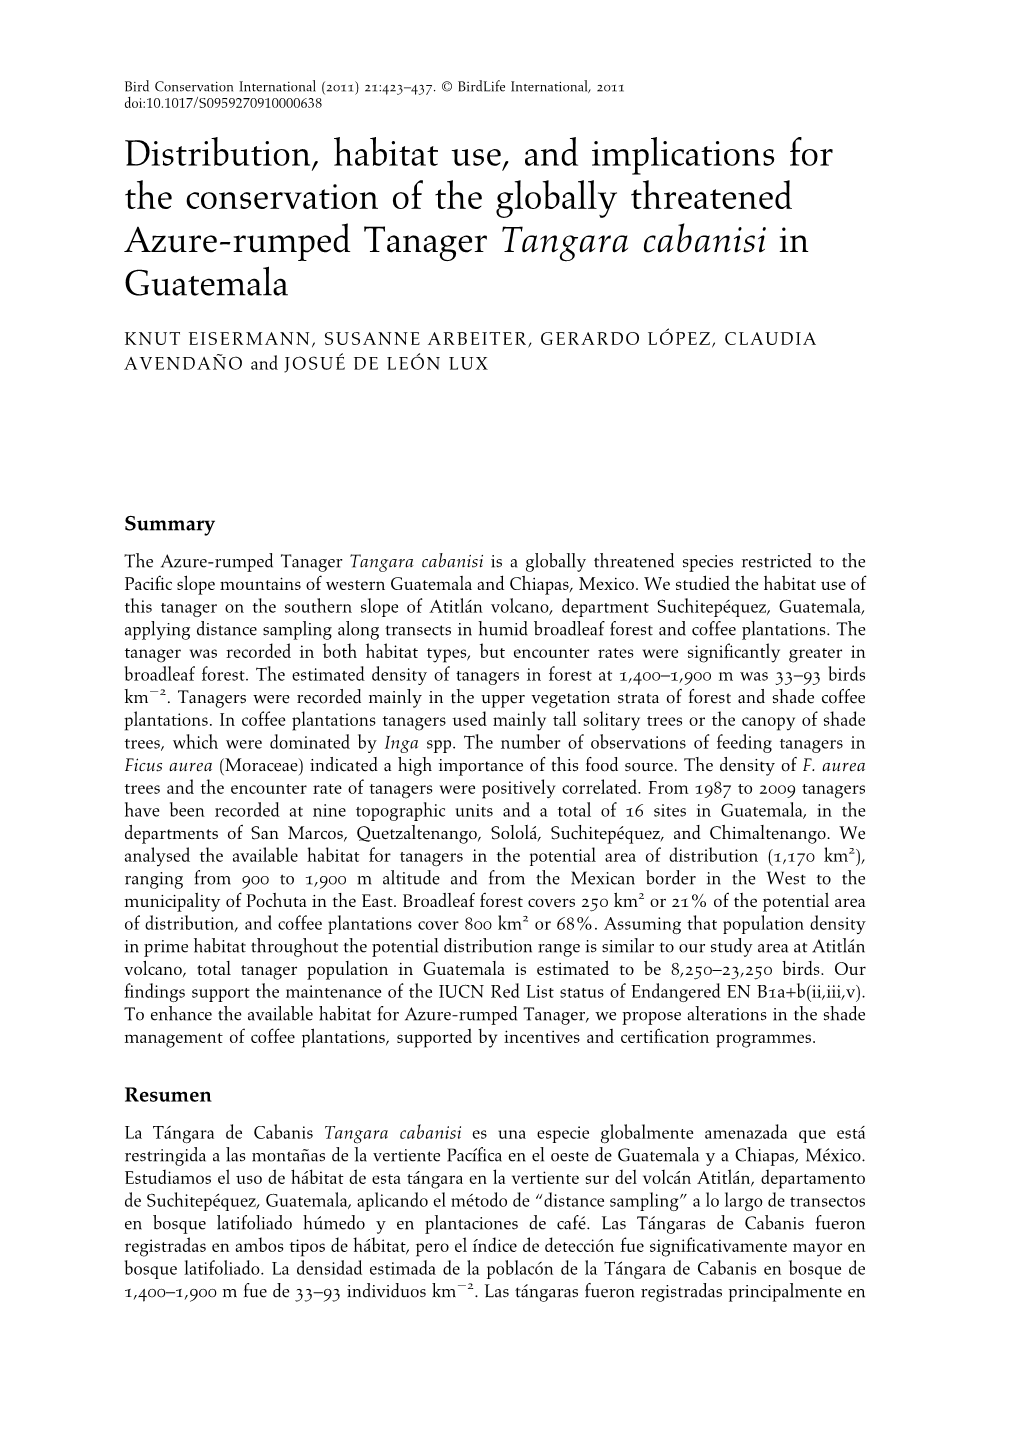 Distribution, Habitat Use, and Implications for the Conservation of the Globally Threatened Azure-Rumped Tanager Tangara Cabanisi in Guatemala